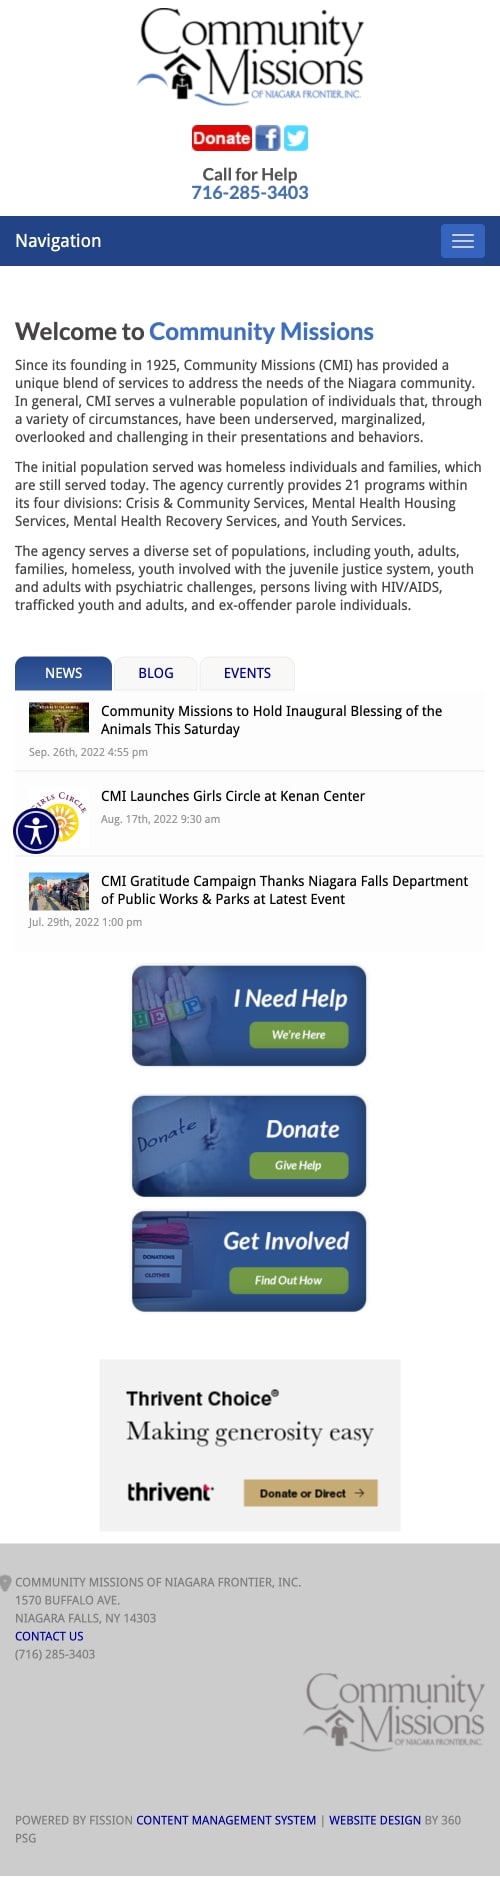 Community Missions of Niagara Frontier Website - Mobile